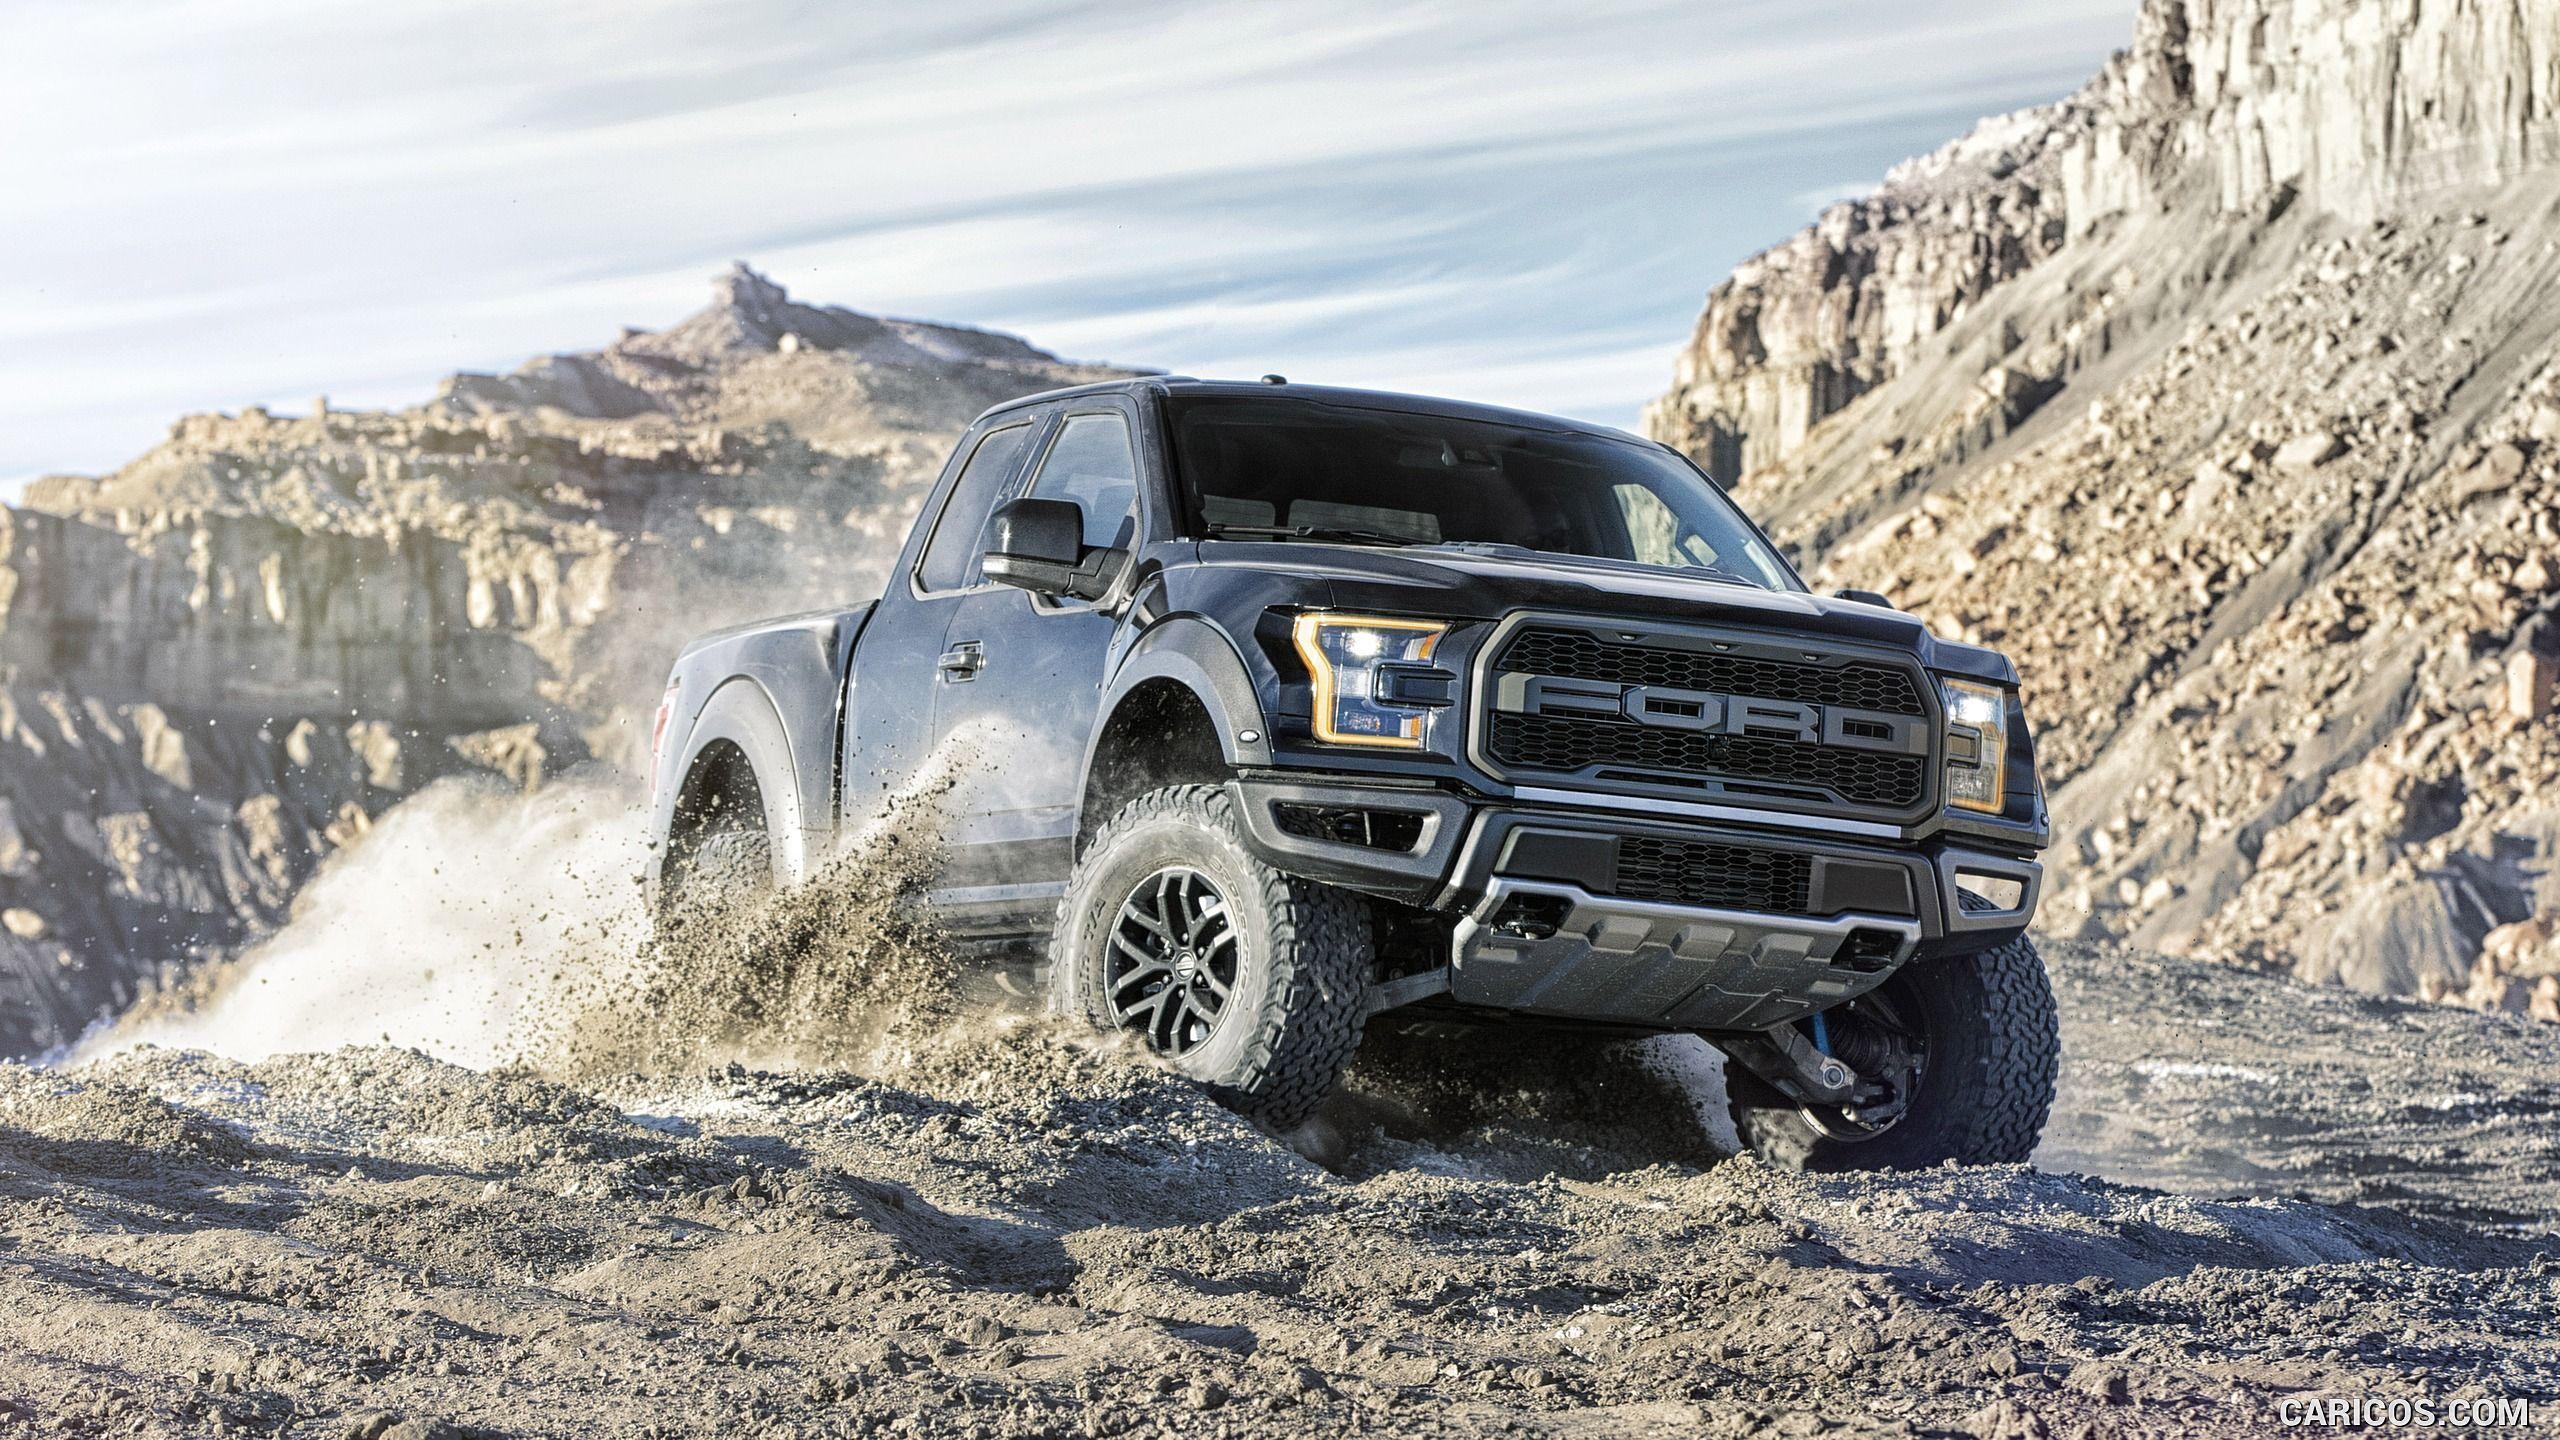 Black Ford Raptor Wallpapers Top Free Black Ford Raptor Backgrounds Wallpaperaccess